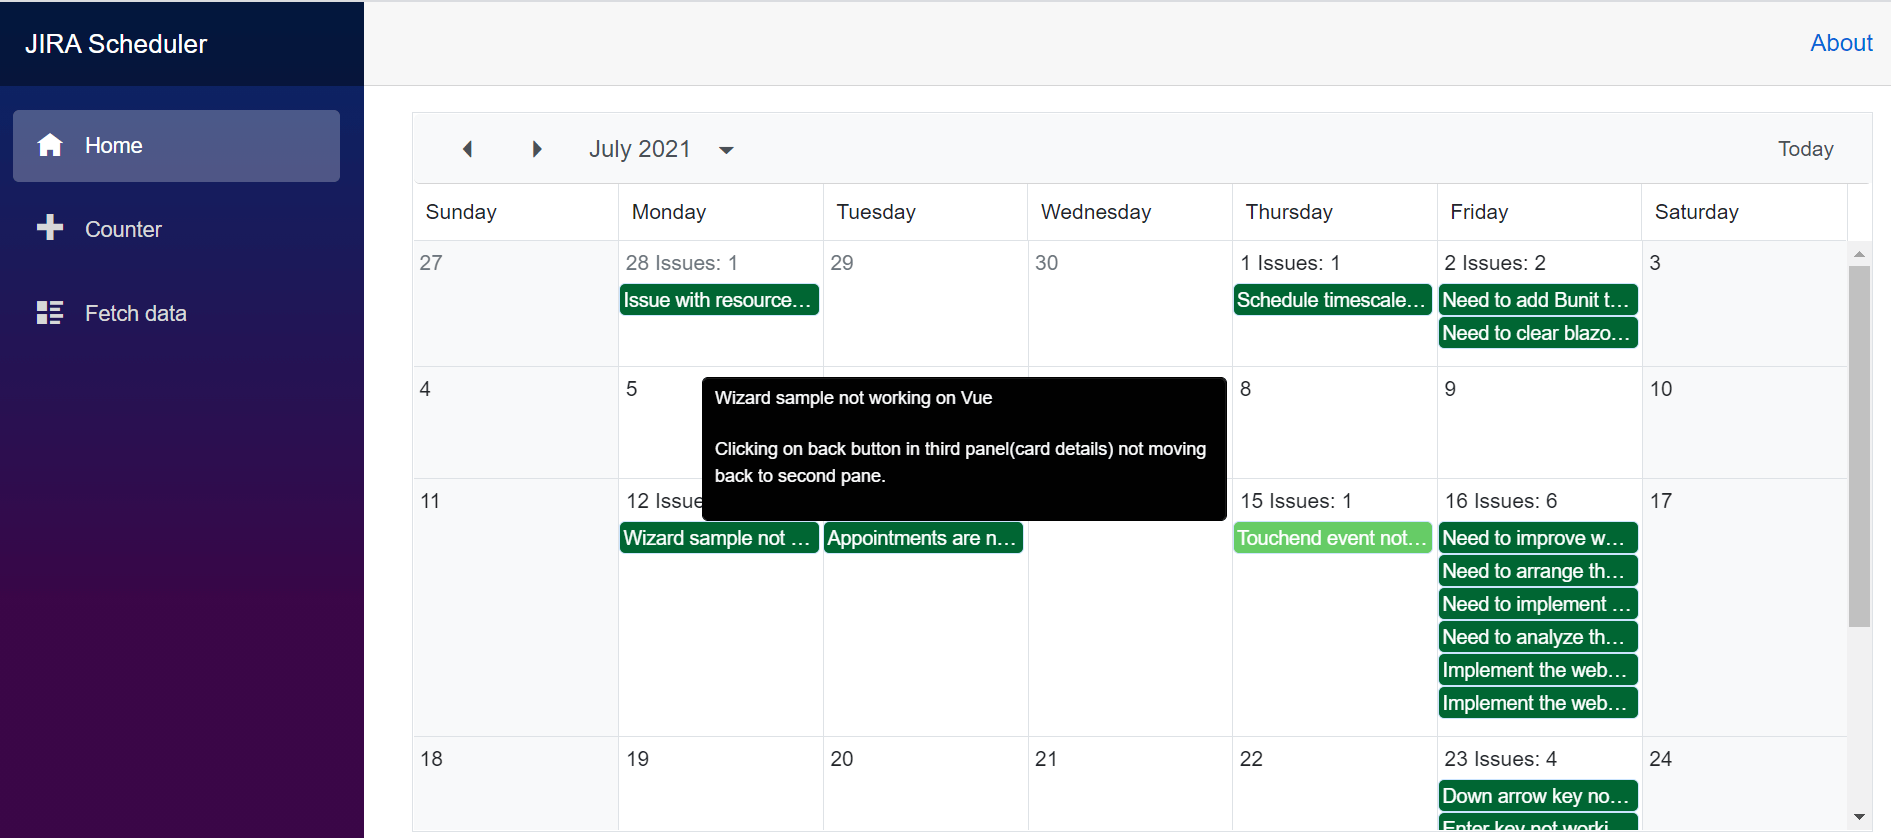 Custom Tooltip on an Appointment